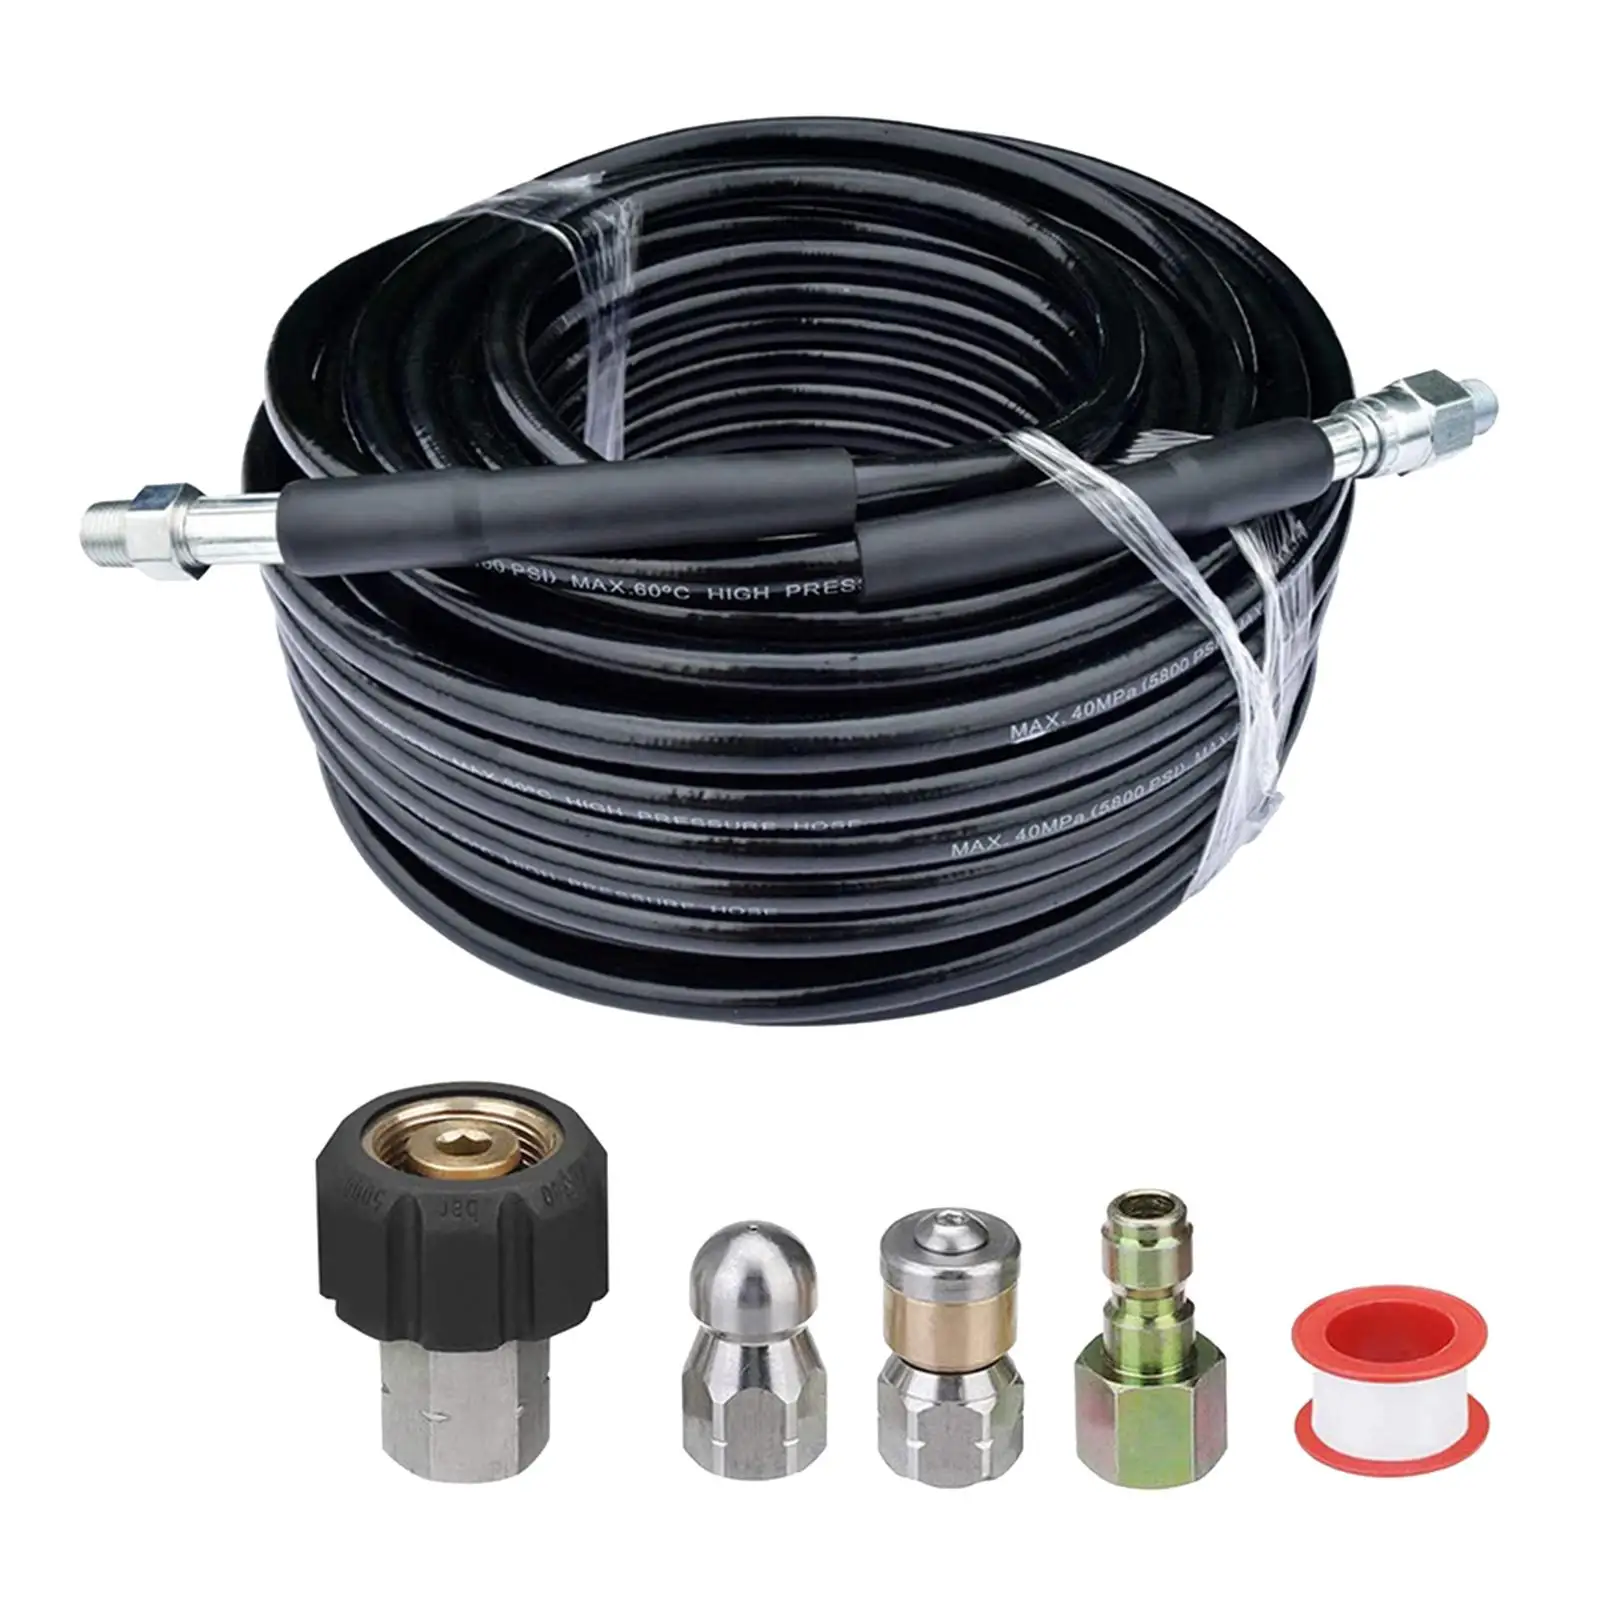 

Sewer Kit Pressure Washer - 1/4 Inch NPT, Drain Cleaning Hose, And Rotating Sewer Jetting Nozzle with Wrench, 5800 PSI